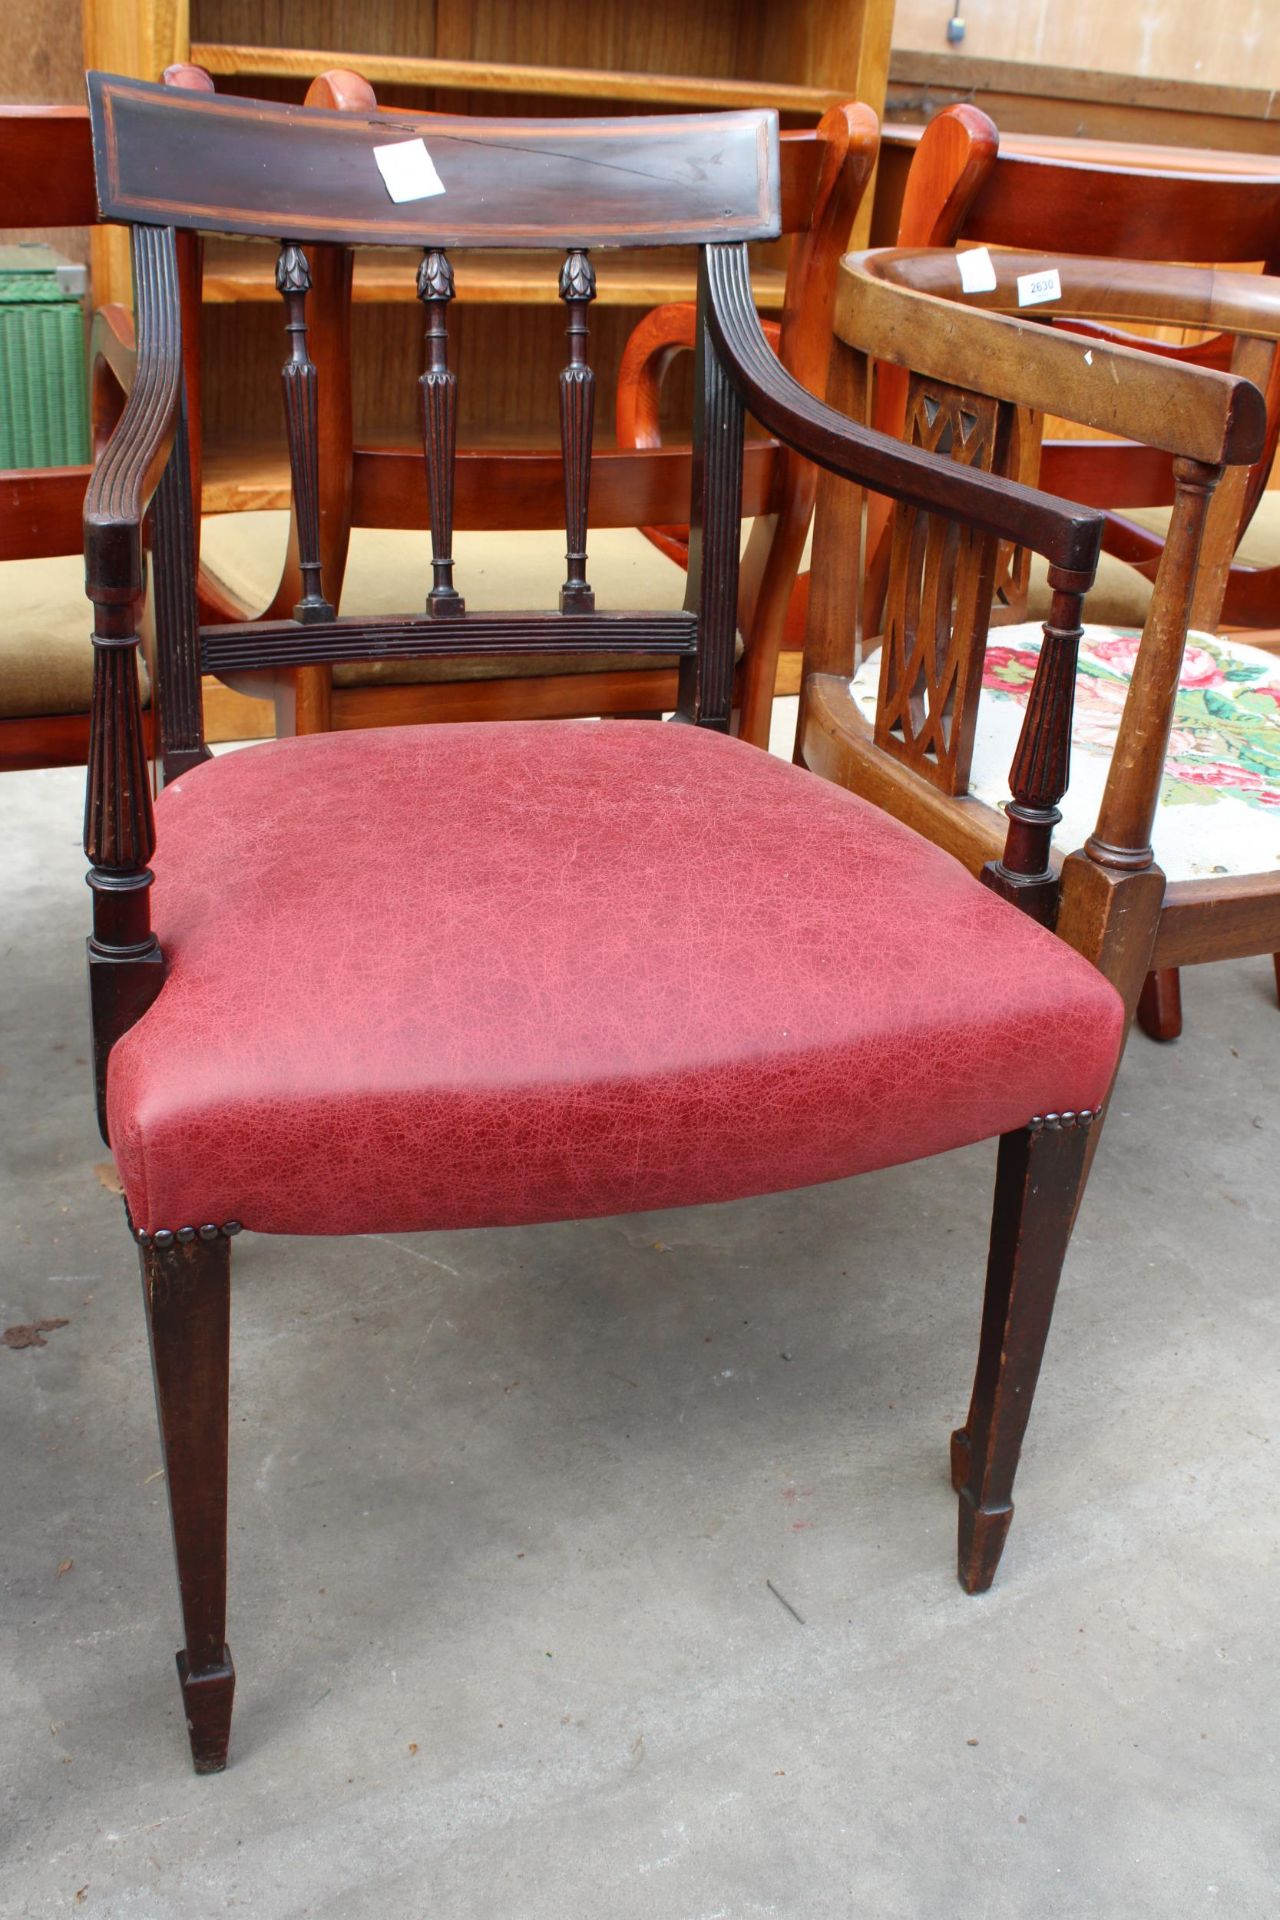 AN EDWARDIAN MAHOGANY AND INLAID TUB CHAIR AND 19TH CENTURY MAHOGANY ELBOW CHAIR - Image 3 of 3